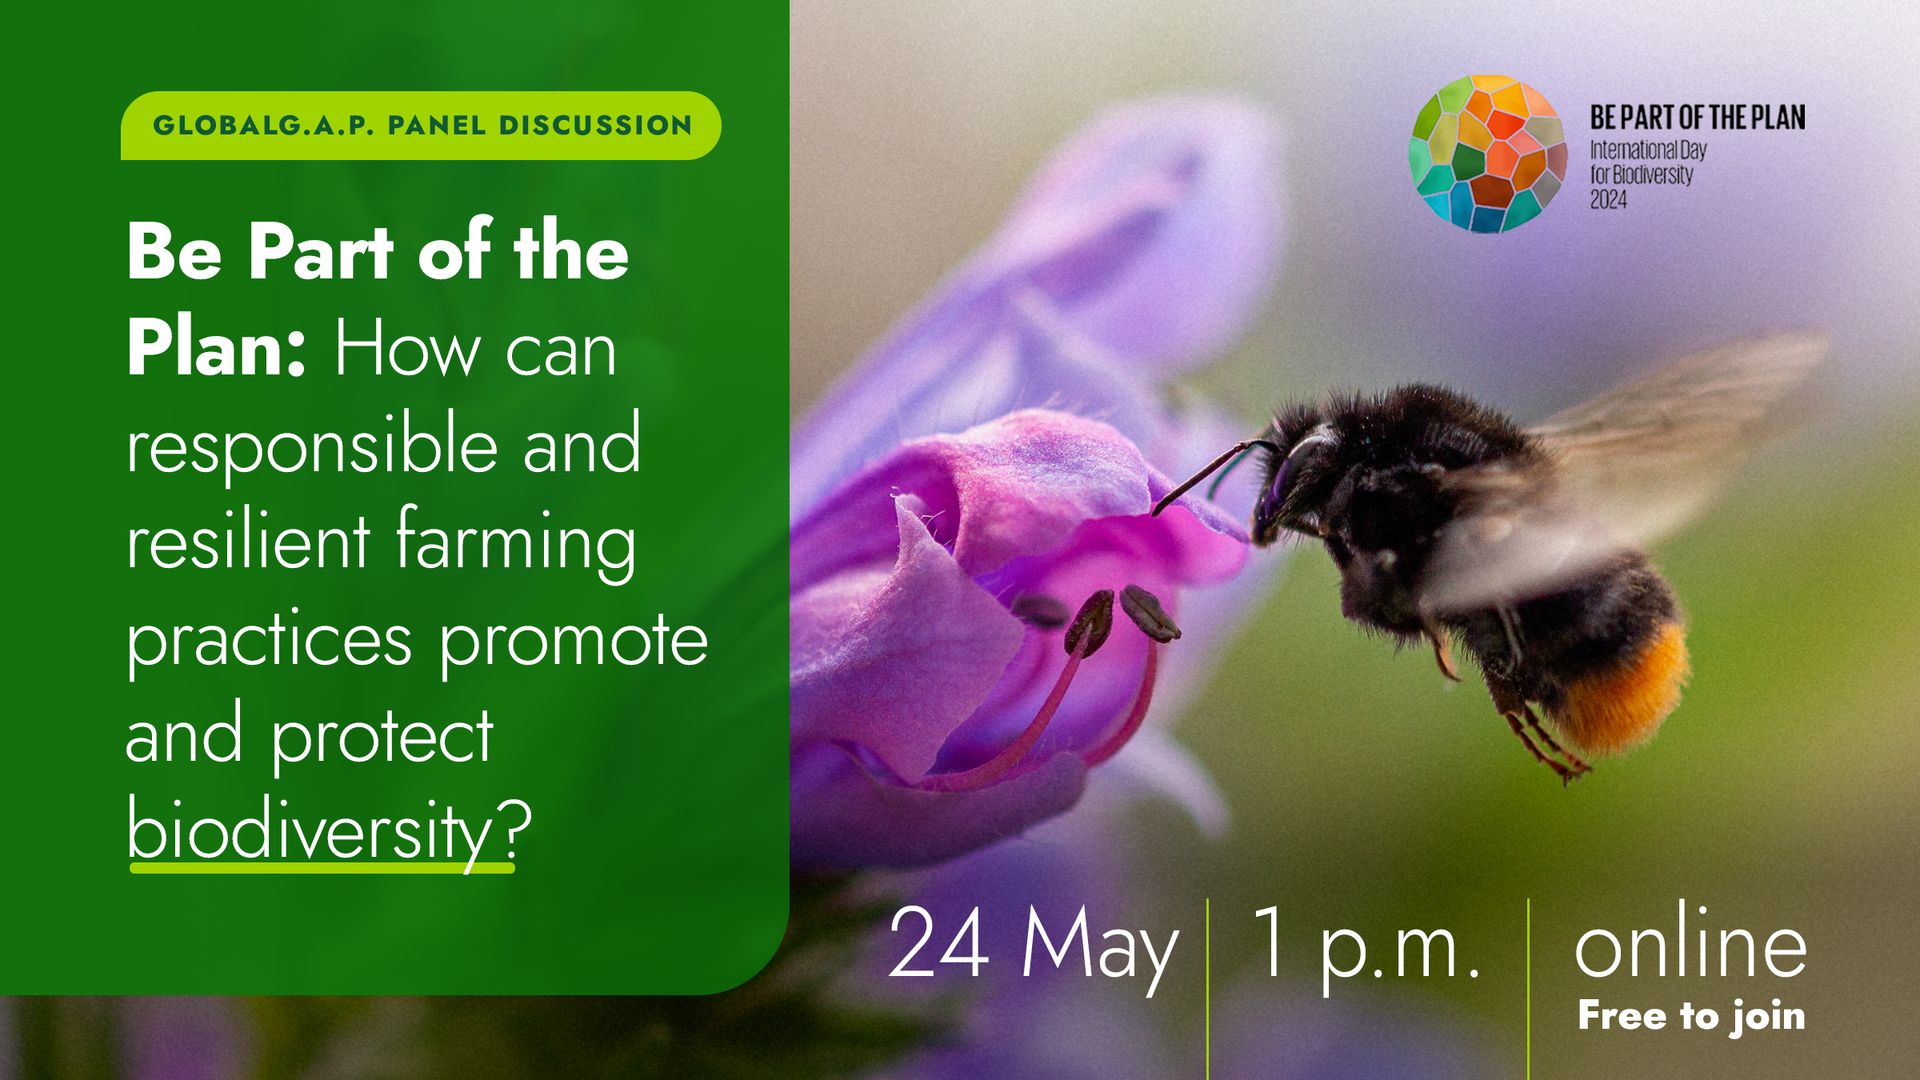 Banner advertising the GLOBALG.A.P. virtual panel discussion on 24 May 2024 at 1.pm. CEST in celebration of the UN International Day of Biological Diversity 